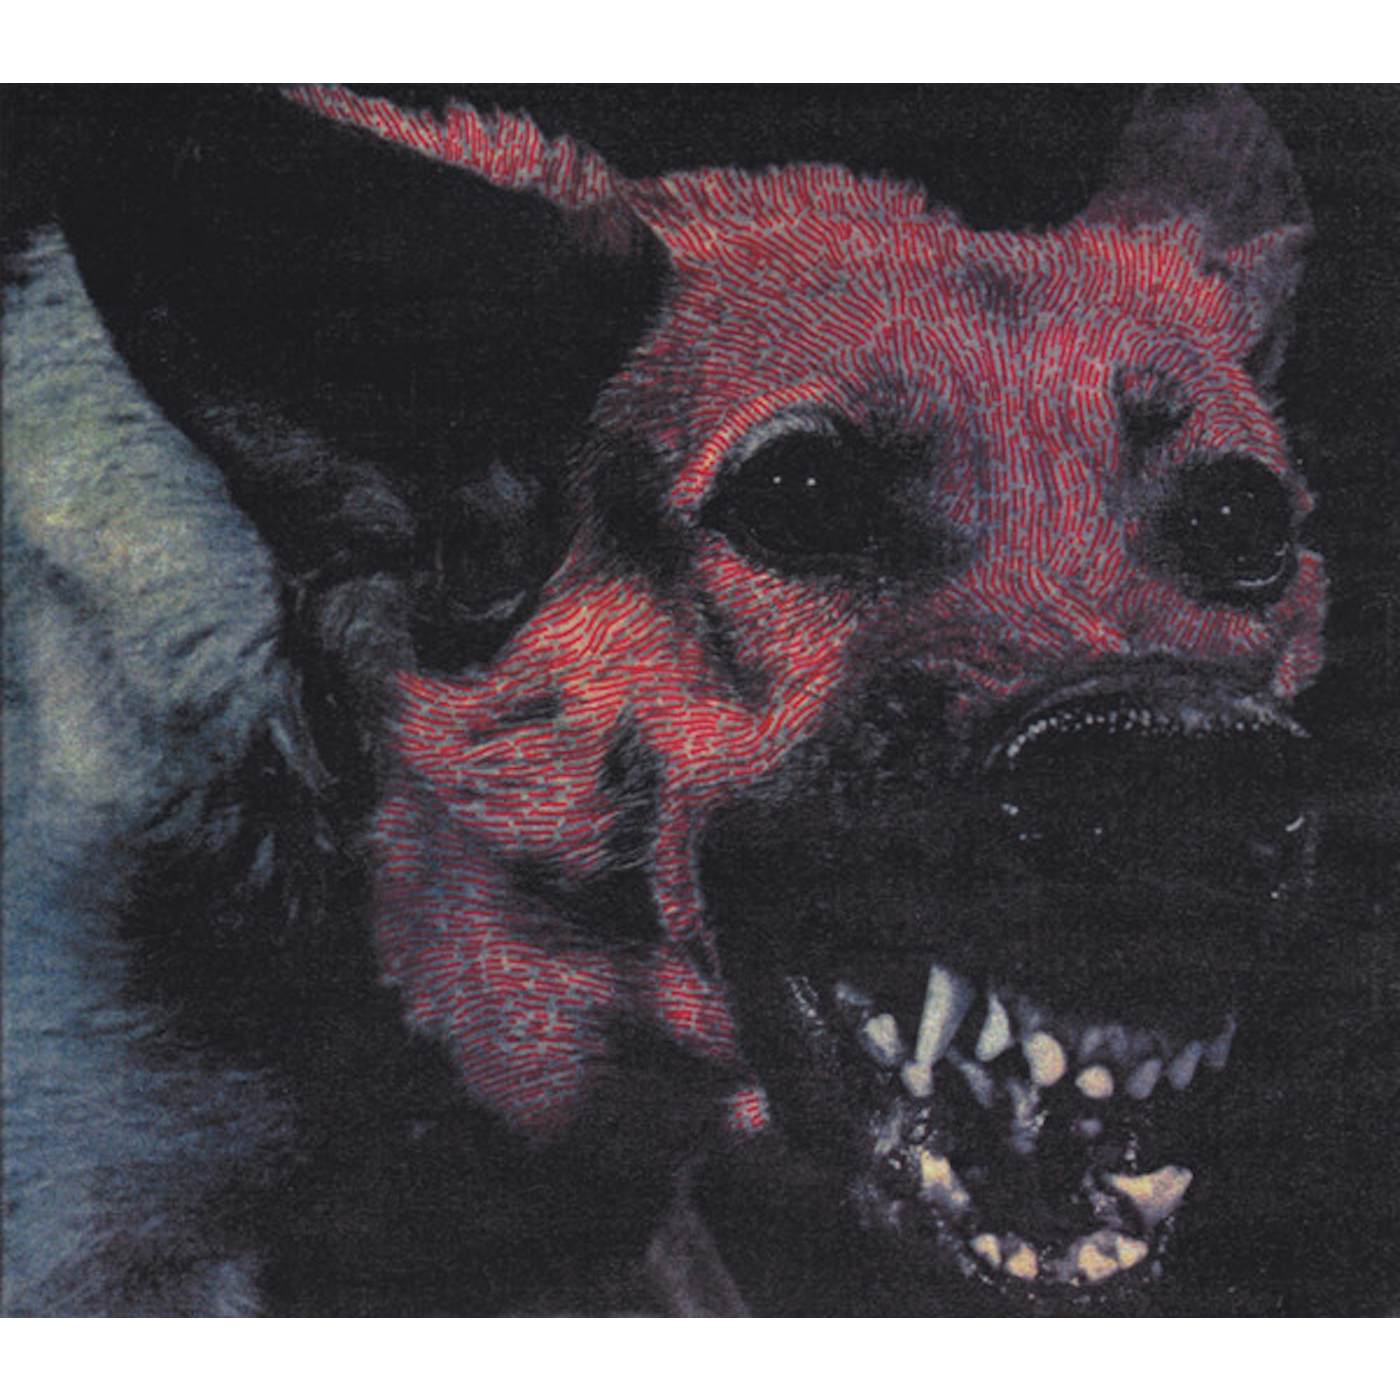 Protomartyr Under Color of Official Right Vinyl Record